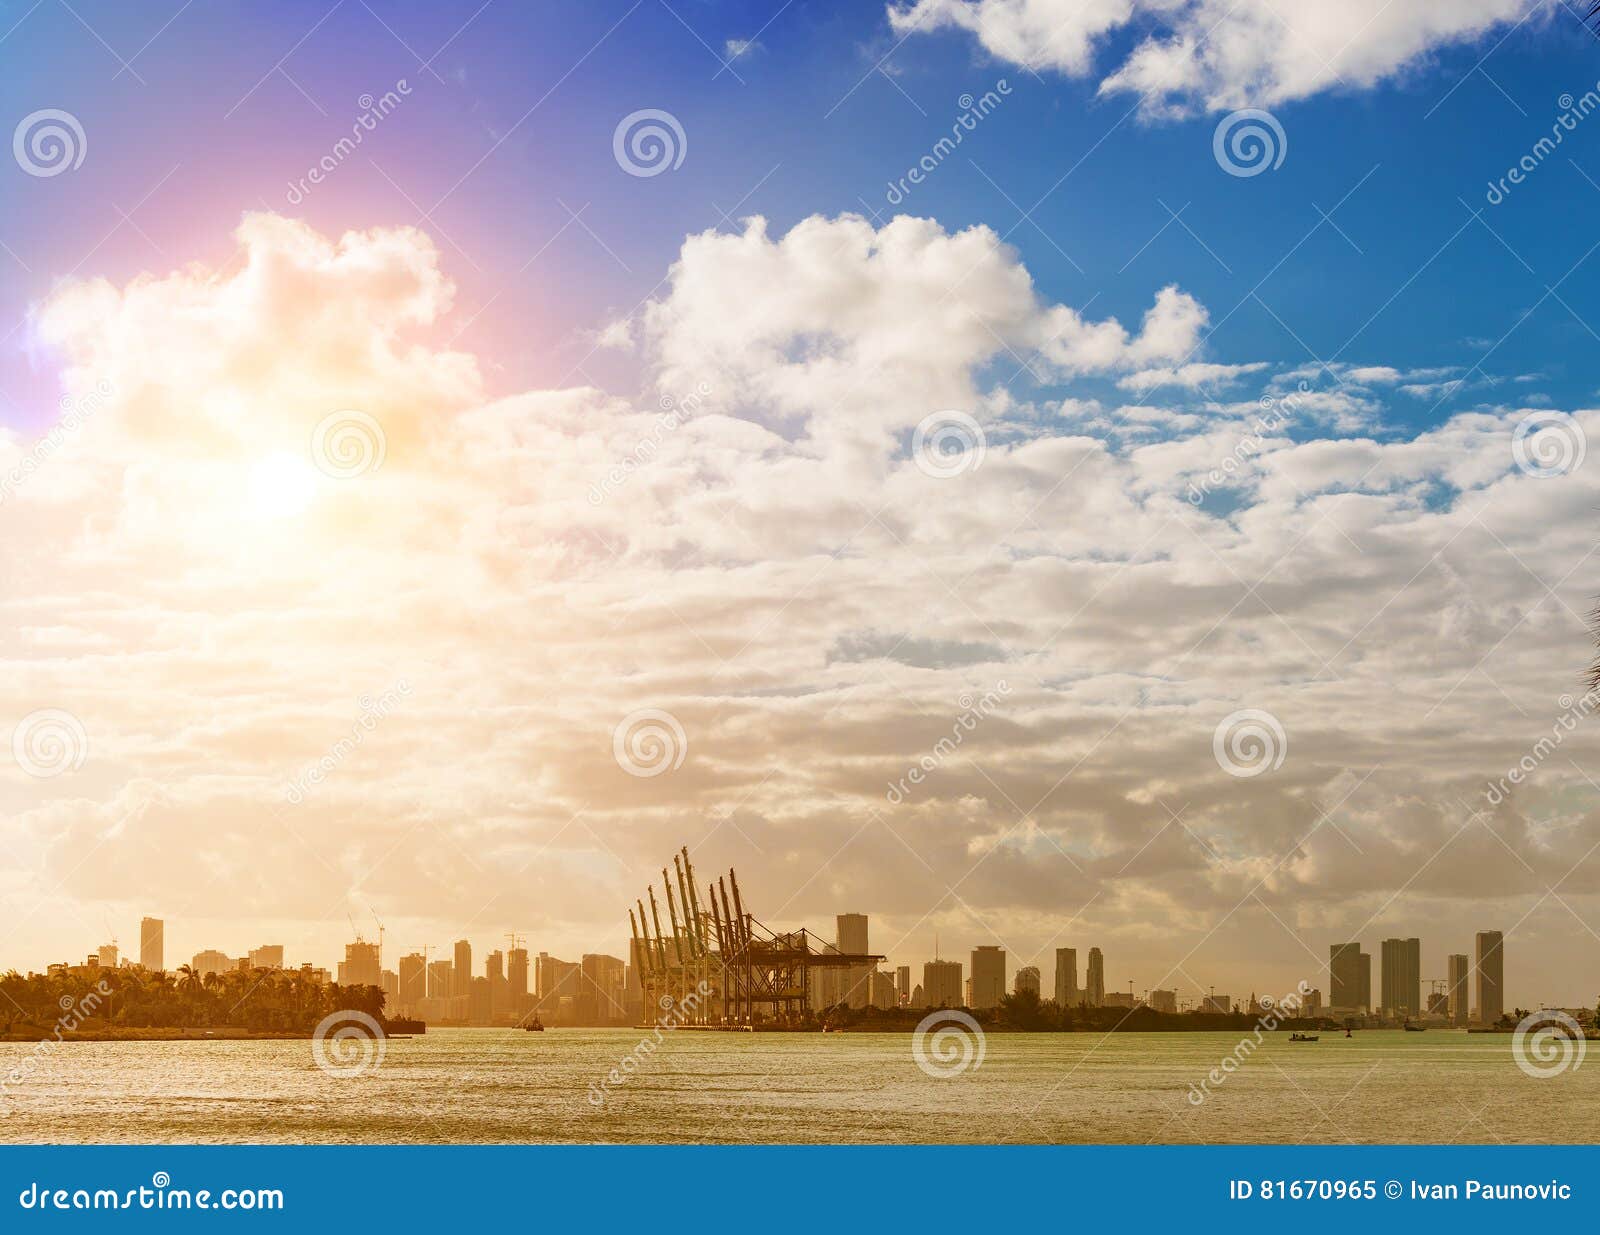 Dodge Island and Downtown Miami, FL Stock Image - Image of luxury ...